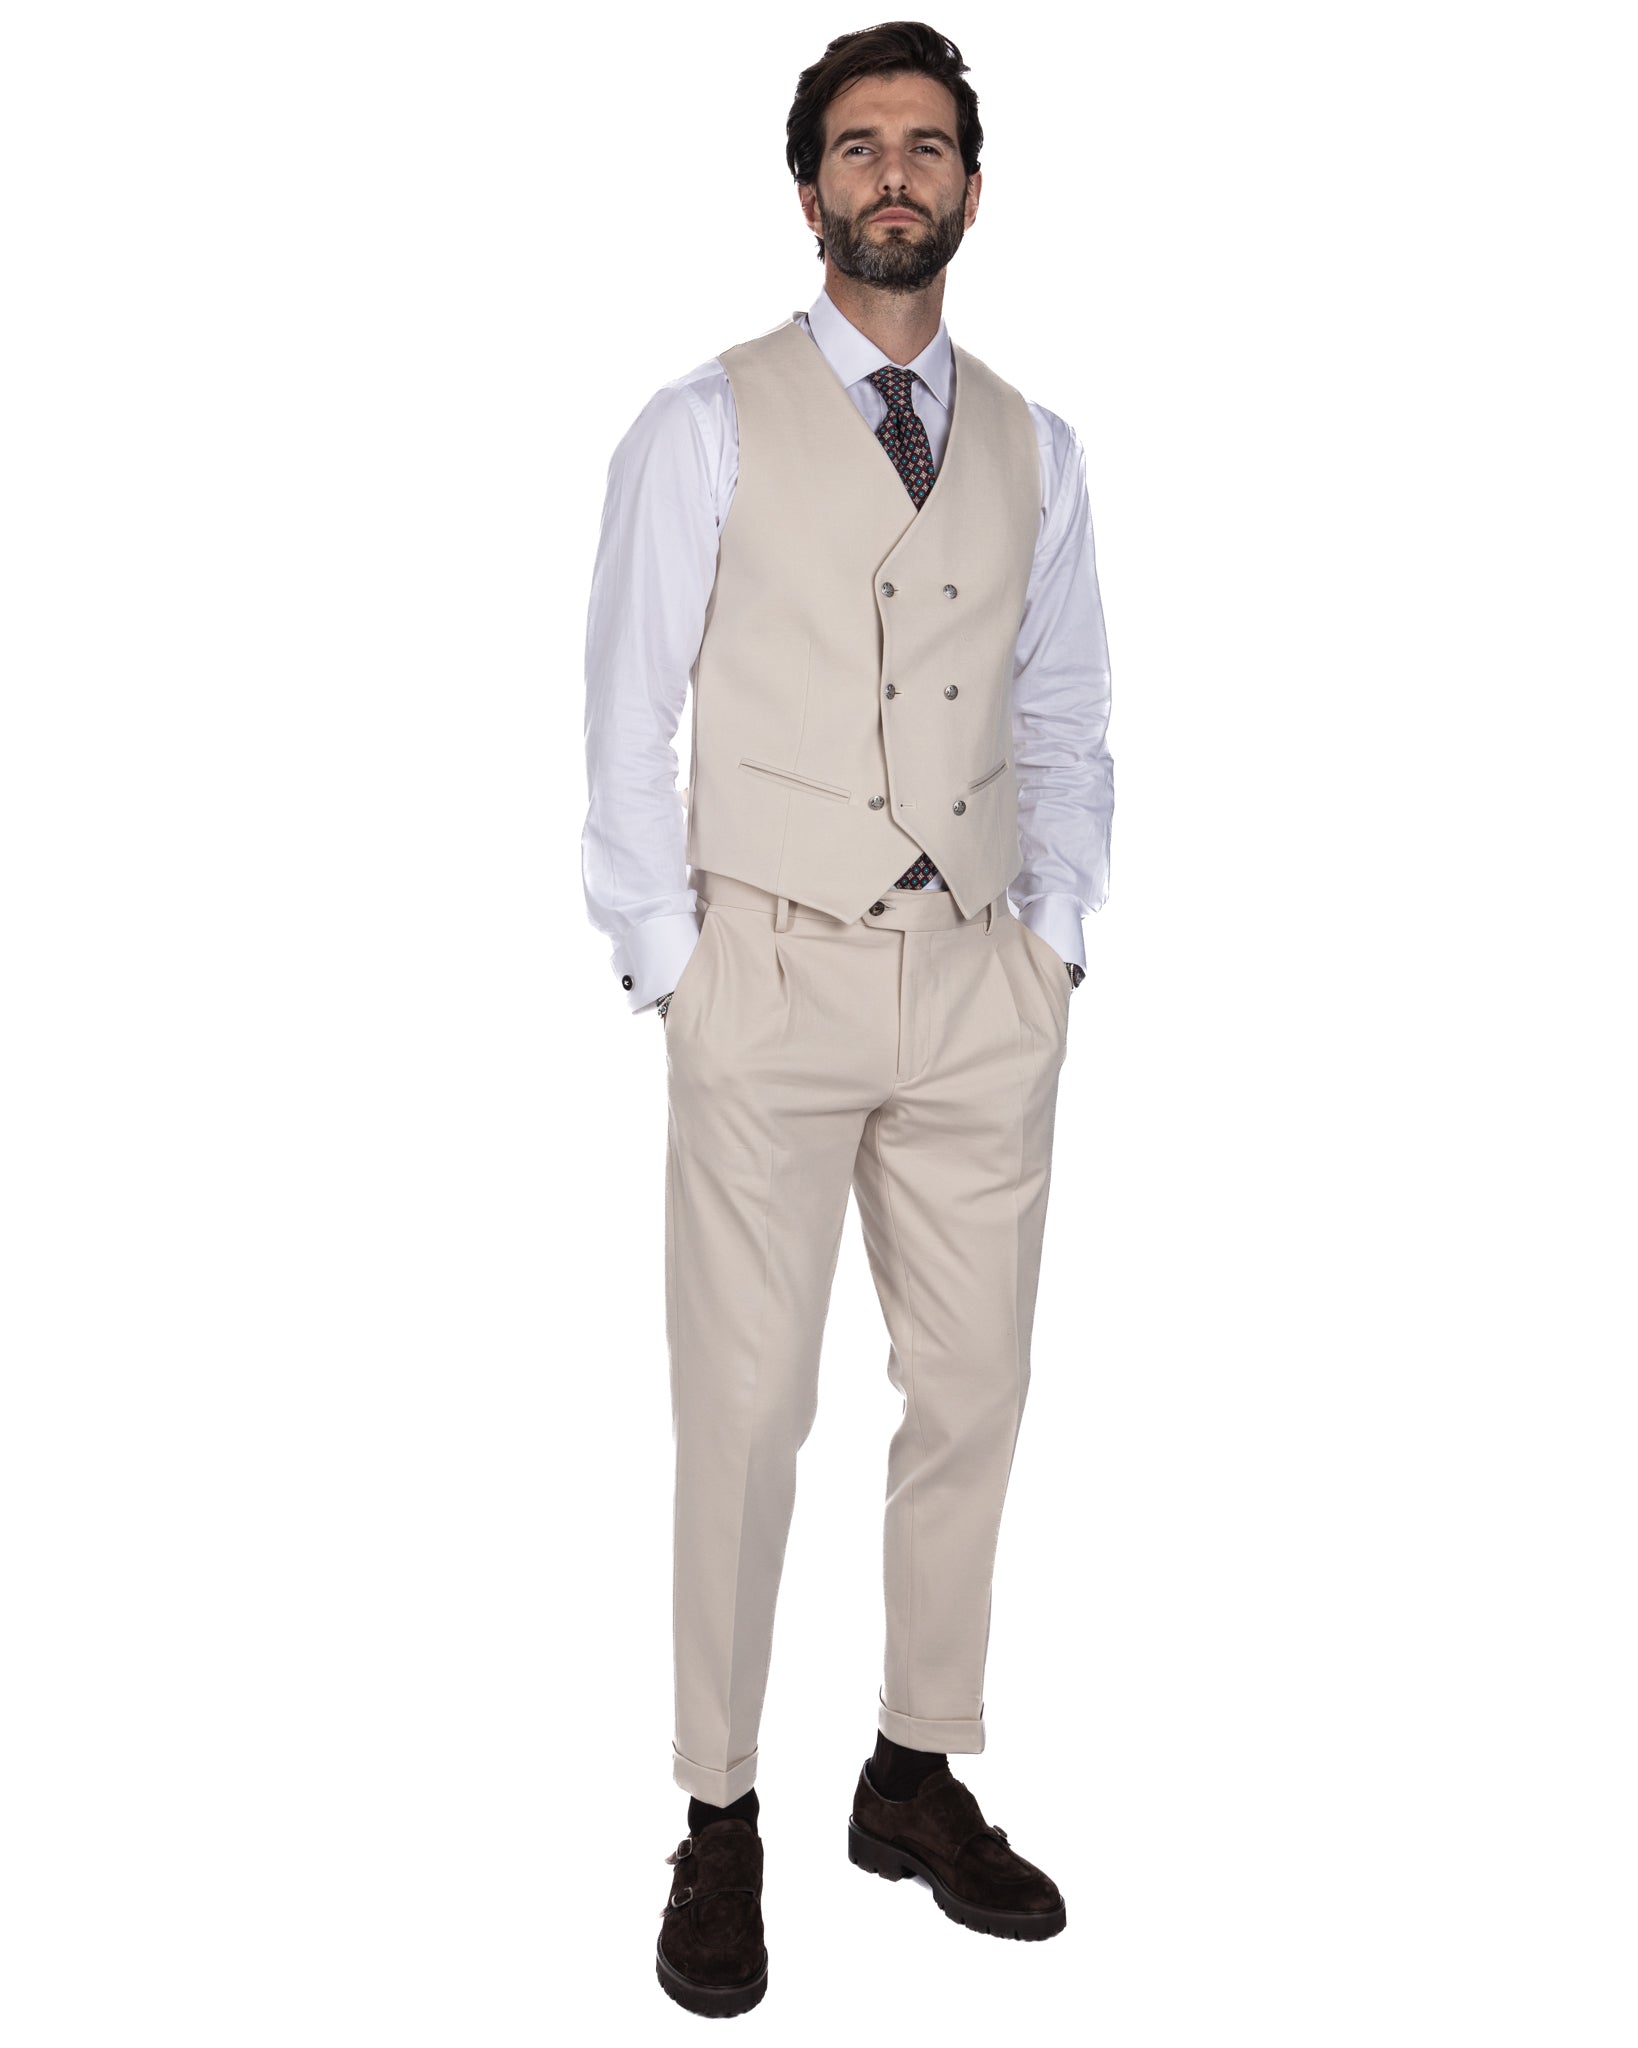 Mustang - double-breasted waistcoat in cream Milan stitch